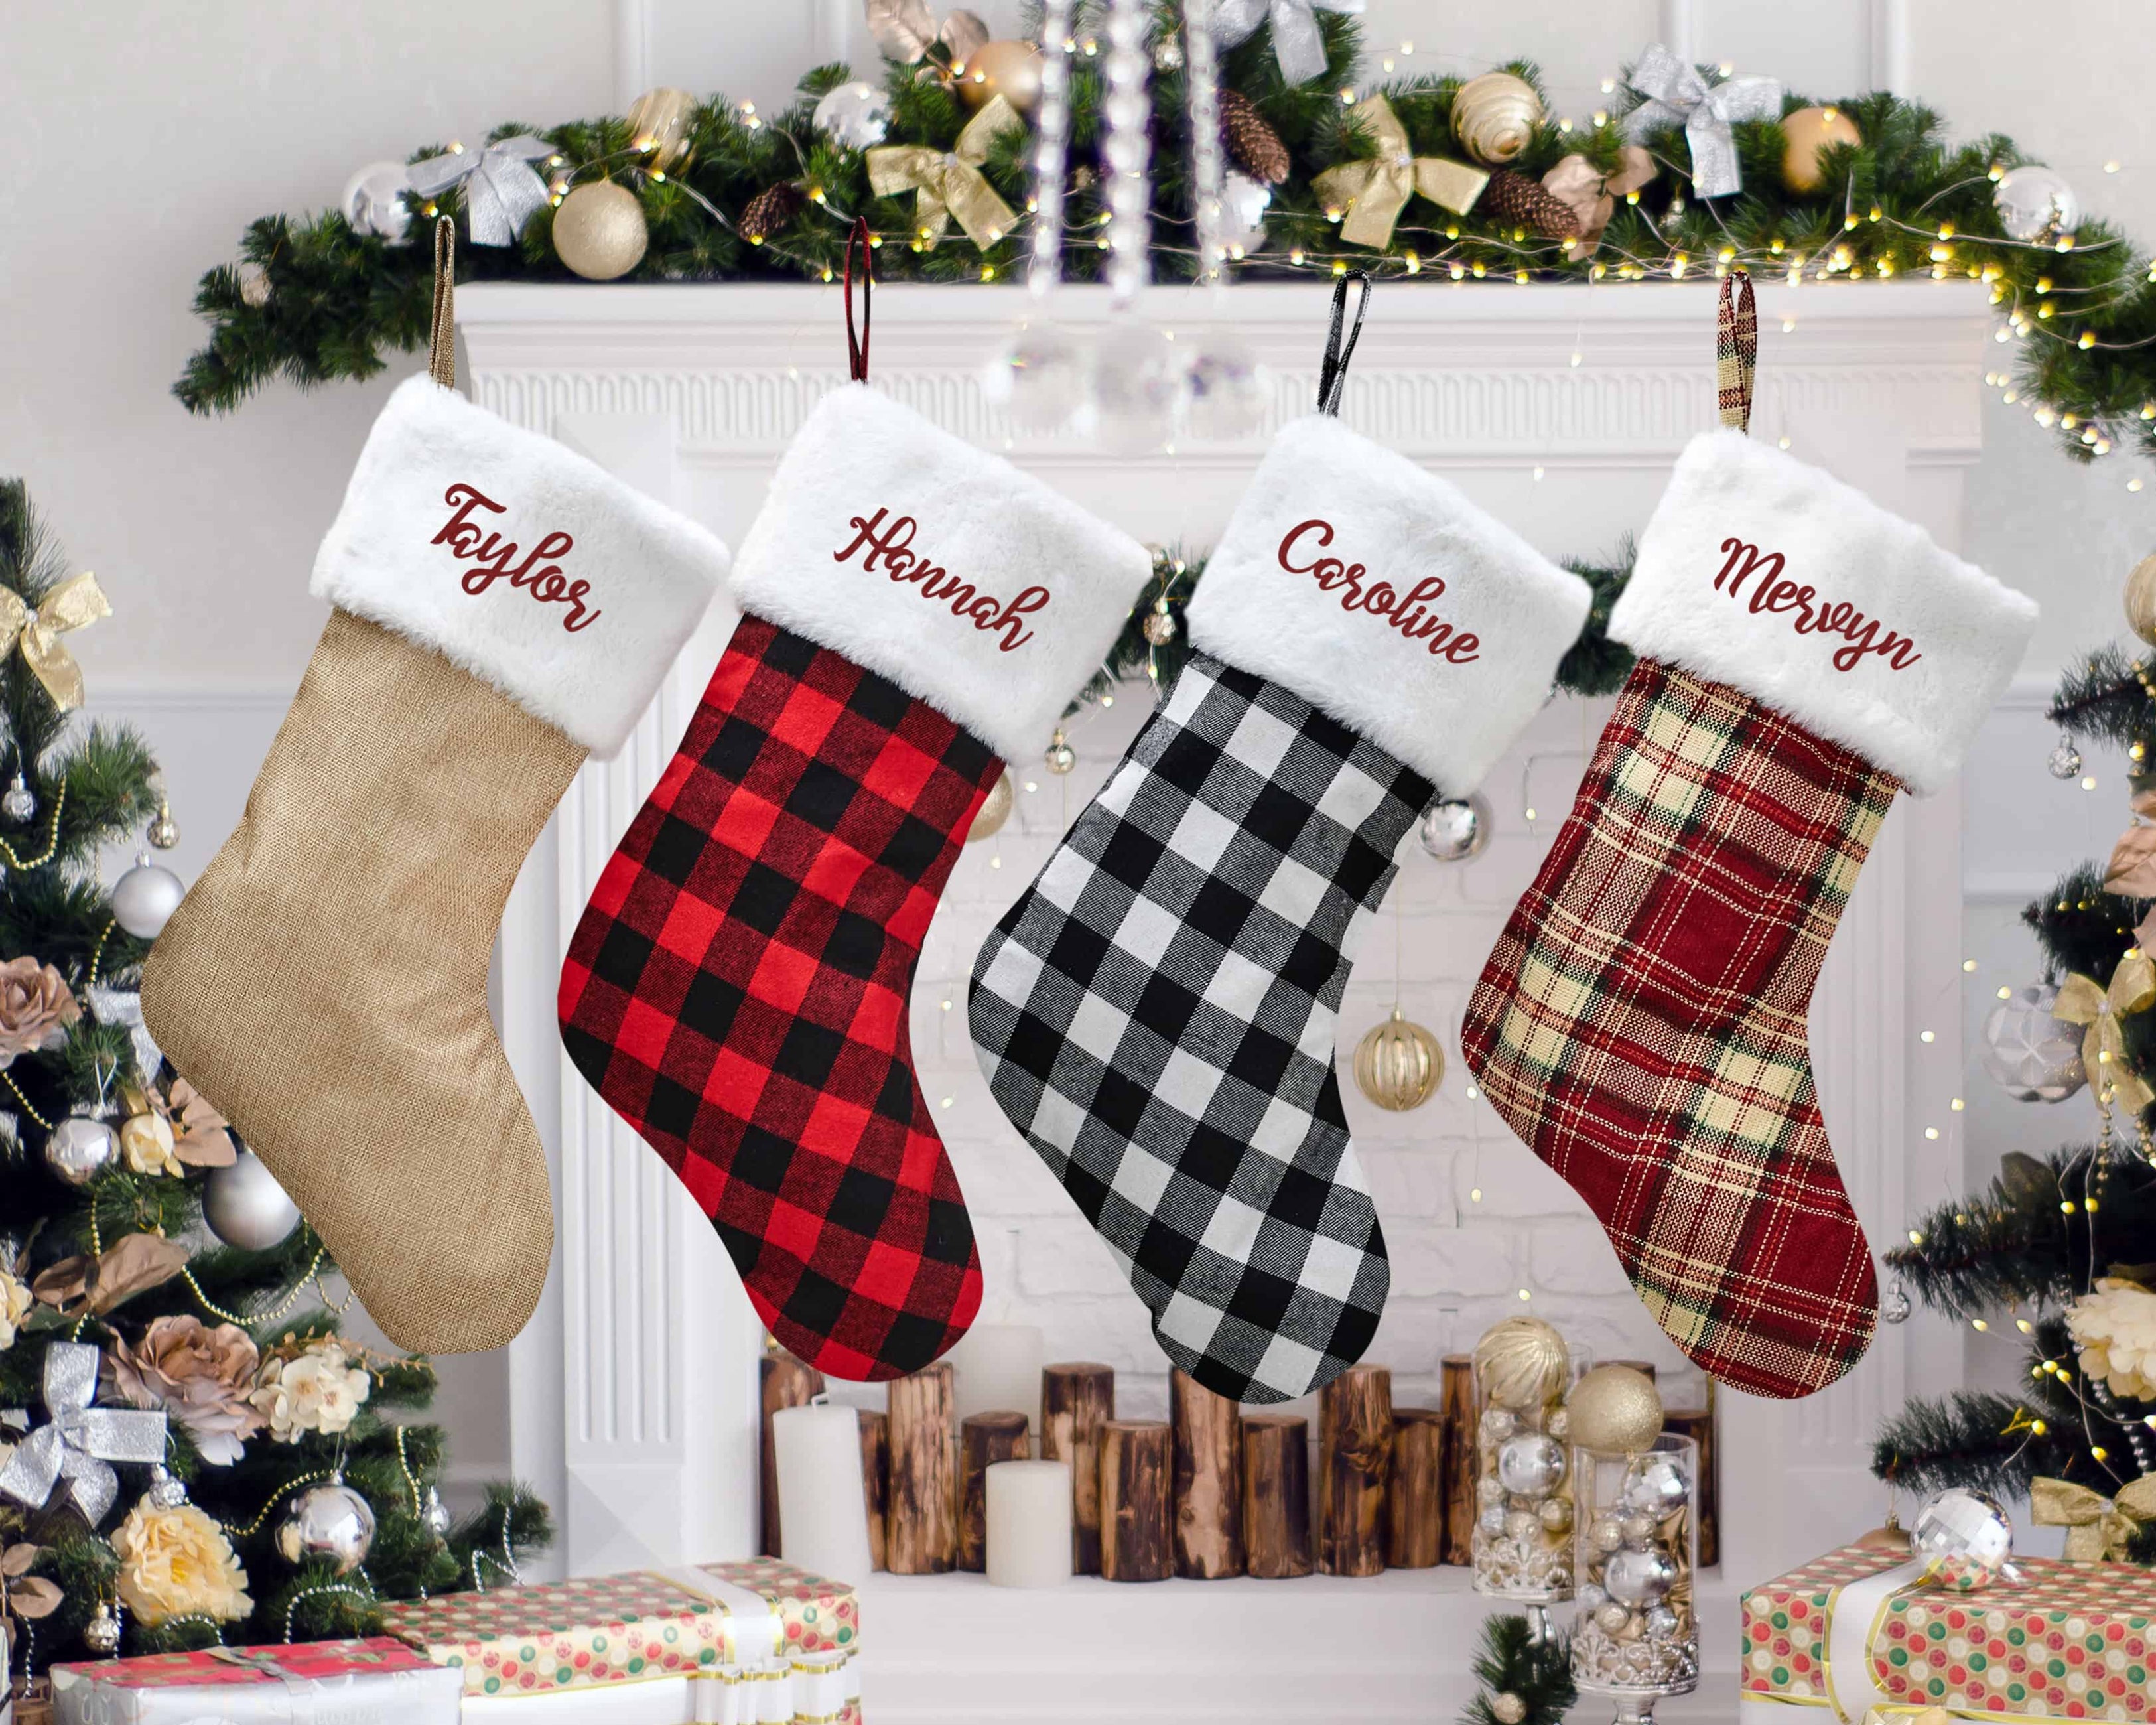 4 different types of personalized buffalo plaid stockings with initials - Hundred Hearts